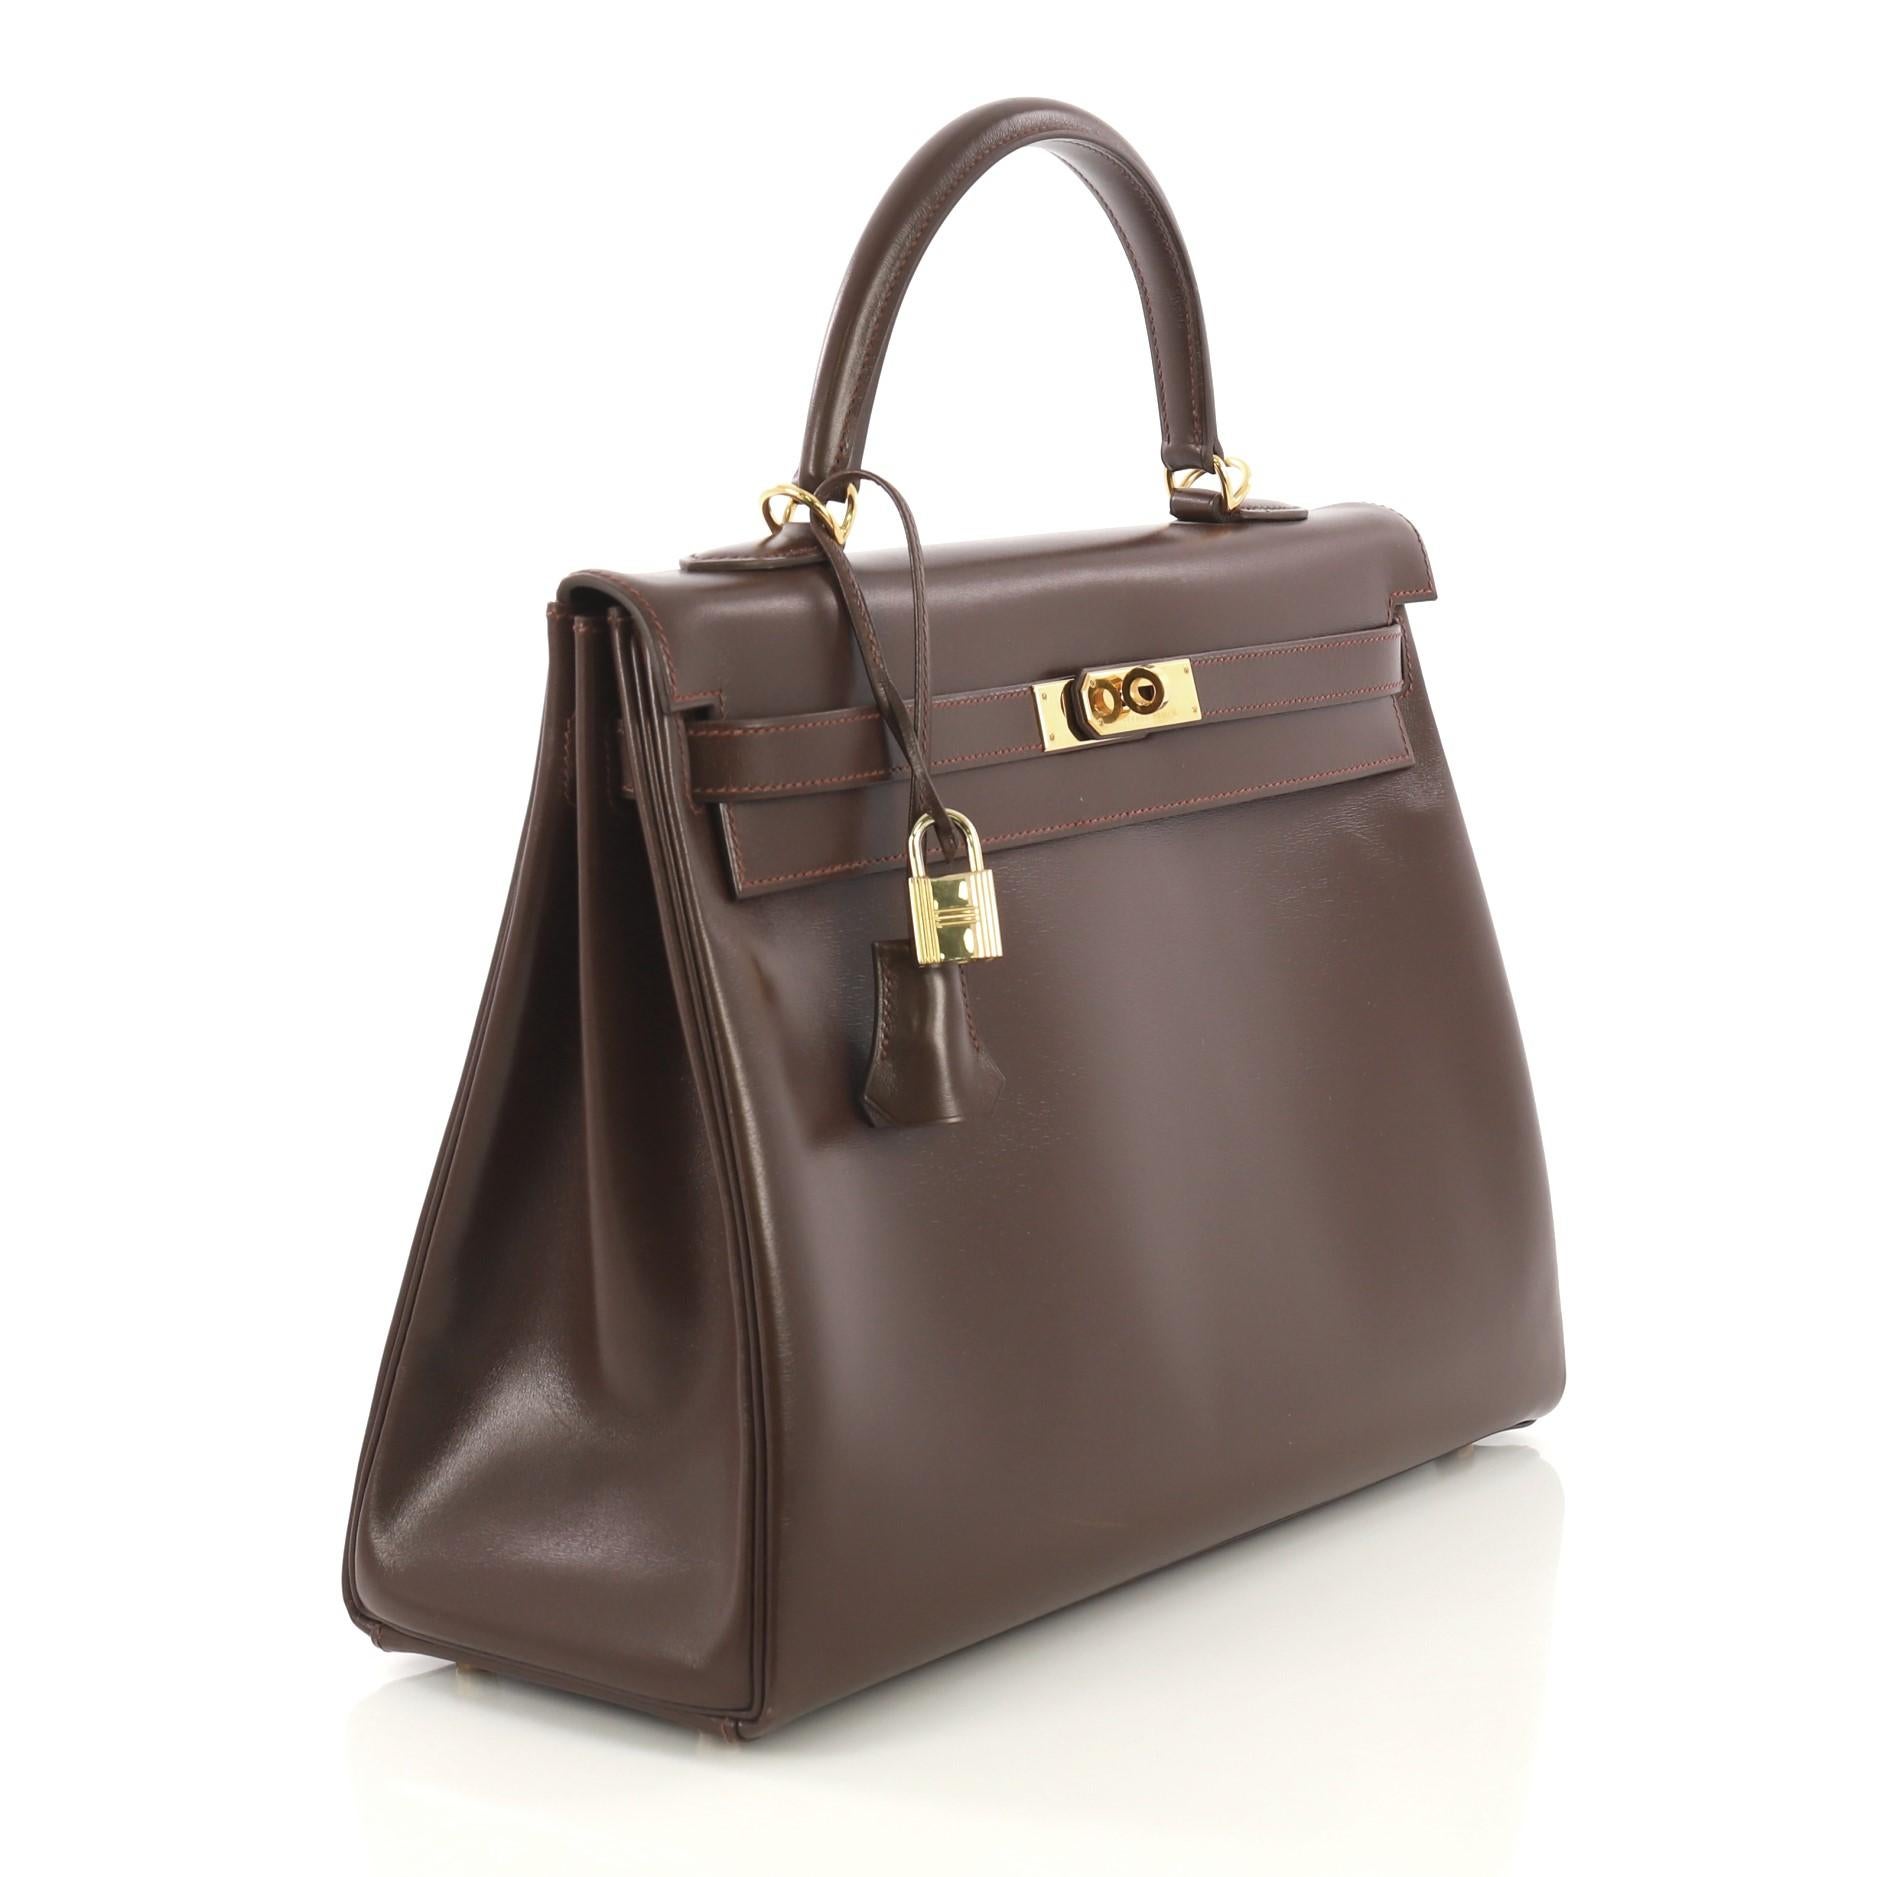 This Hermes Kelly Handbag Havane Box Calf with Gold Hardware 40, crafted from Havane brown Box Calf leather, features a single top handle strap and gold hardware. Its turn-lock closure opens to a Havane brown Chevre leather interior with zip and